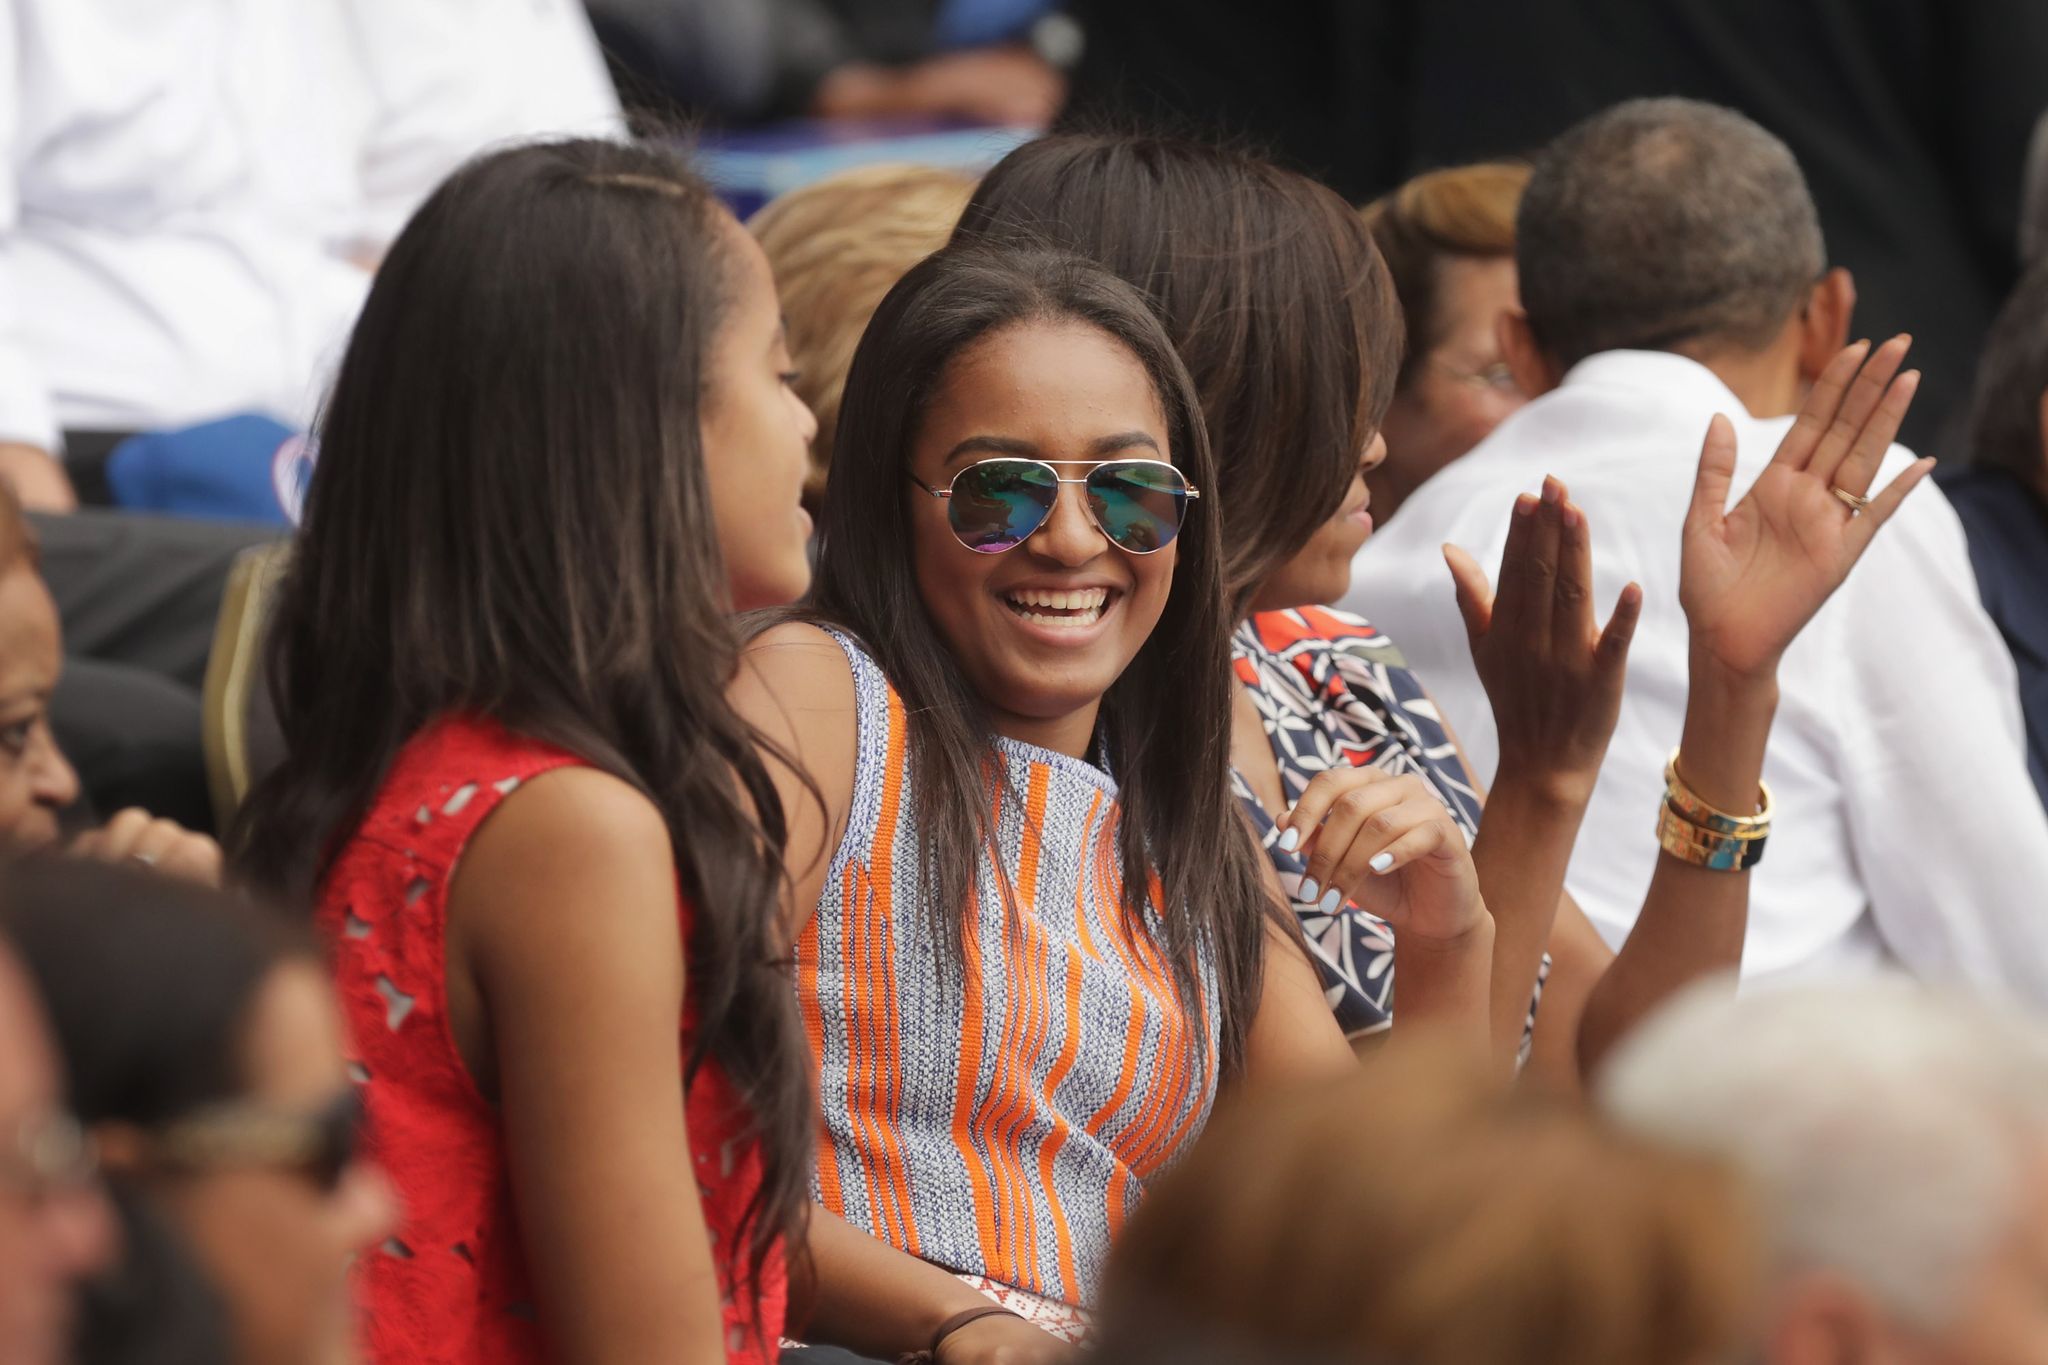 havana, cuba   march 22  l r malia obama, sasha obama, us first lady michelle obama and president barack obama react to the first run scored during an exhibition game between the cuban national baseball team and major league baseballs tampa bay devil rays at the estado latinoamericano march 22, 2016 in havana, cuba this is the first time a sittng president has visited cuba in 88 years  photo by chip somodevillagetty images